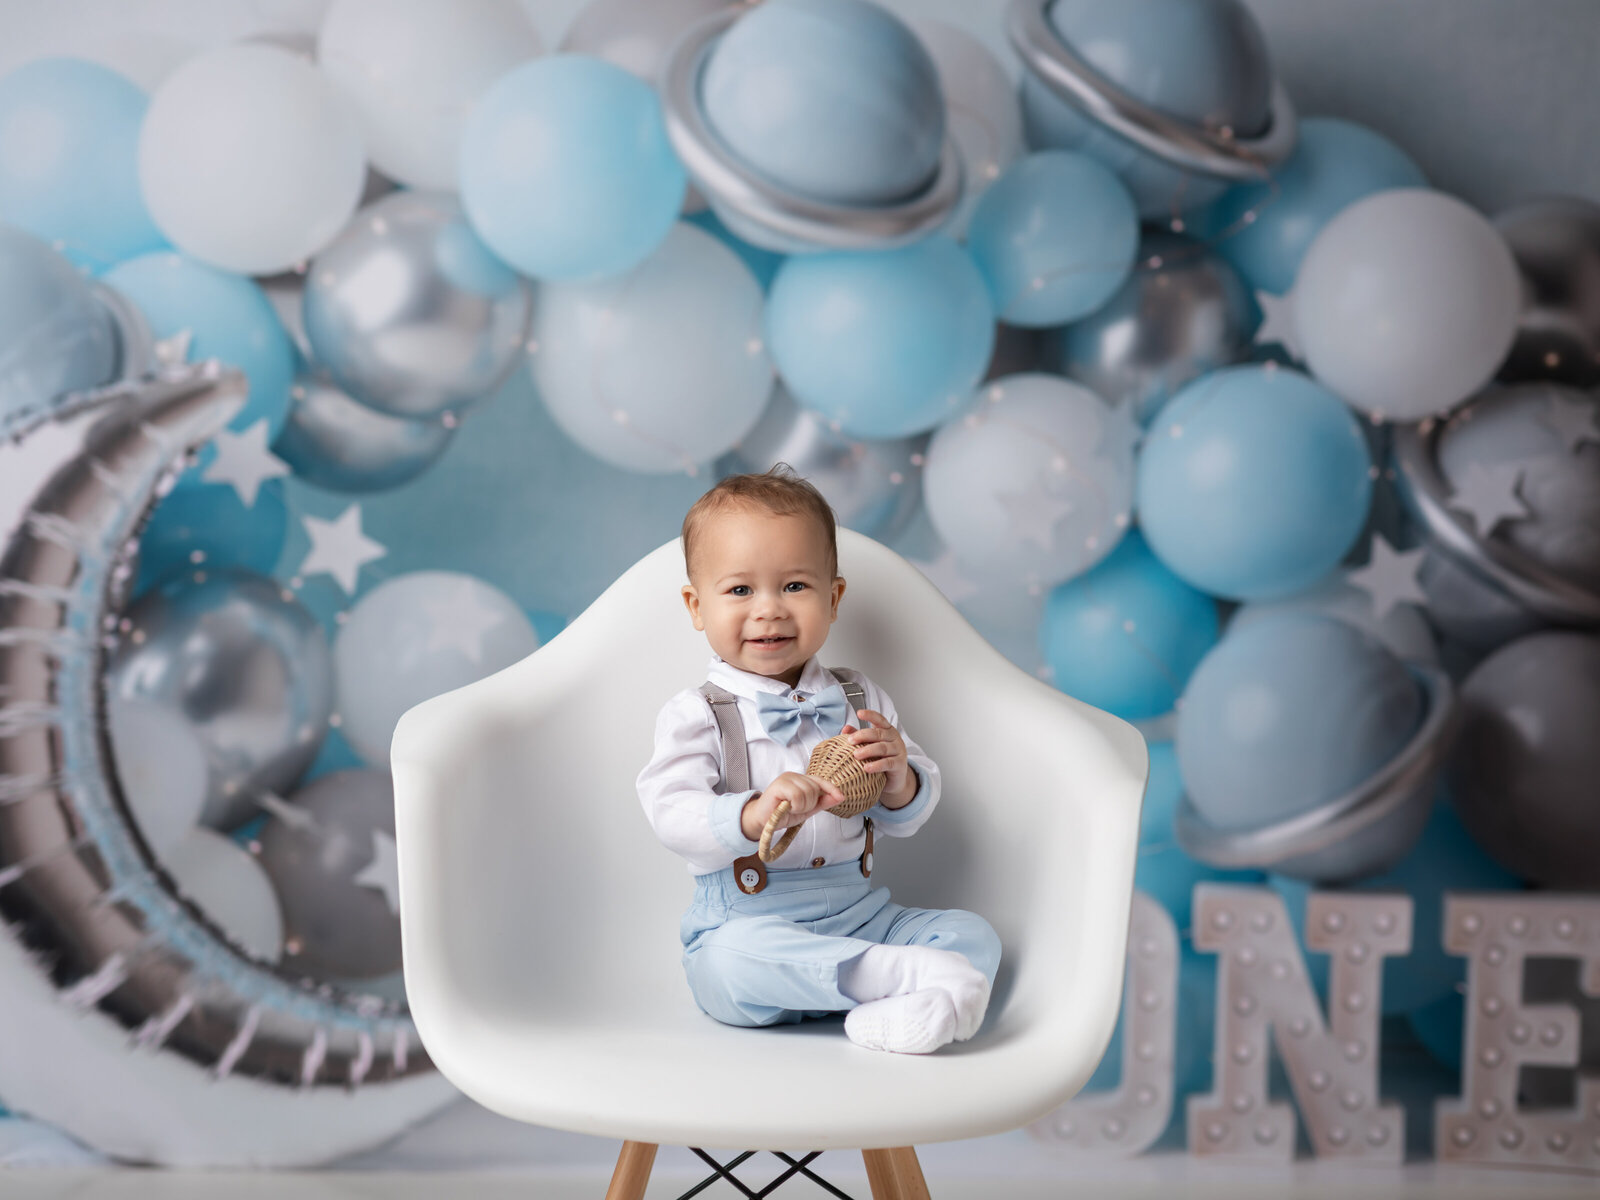 one year old boy sitting in white chair for cake smash photoshoot